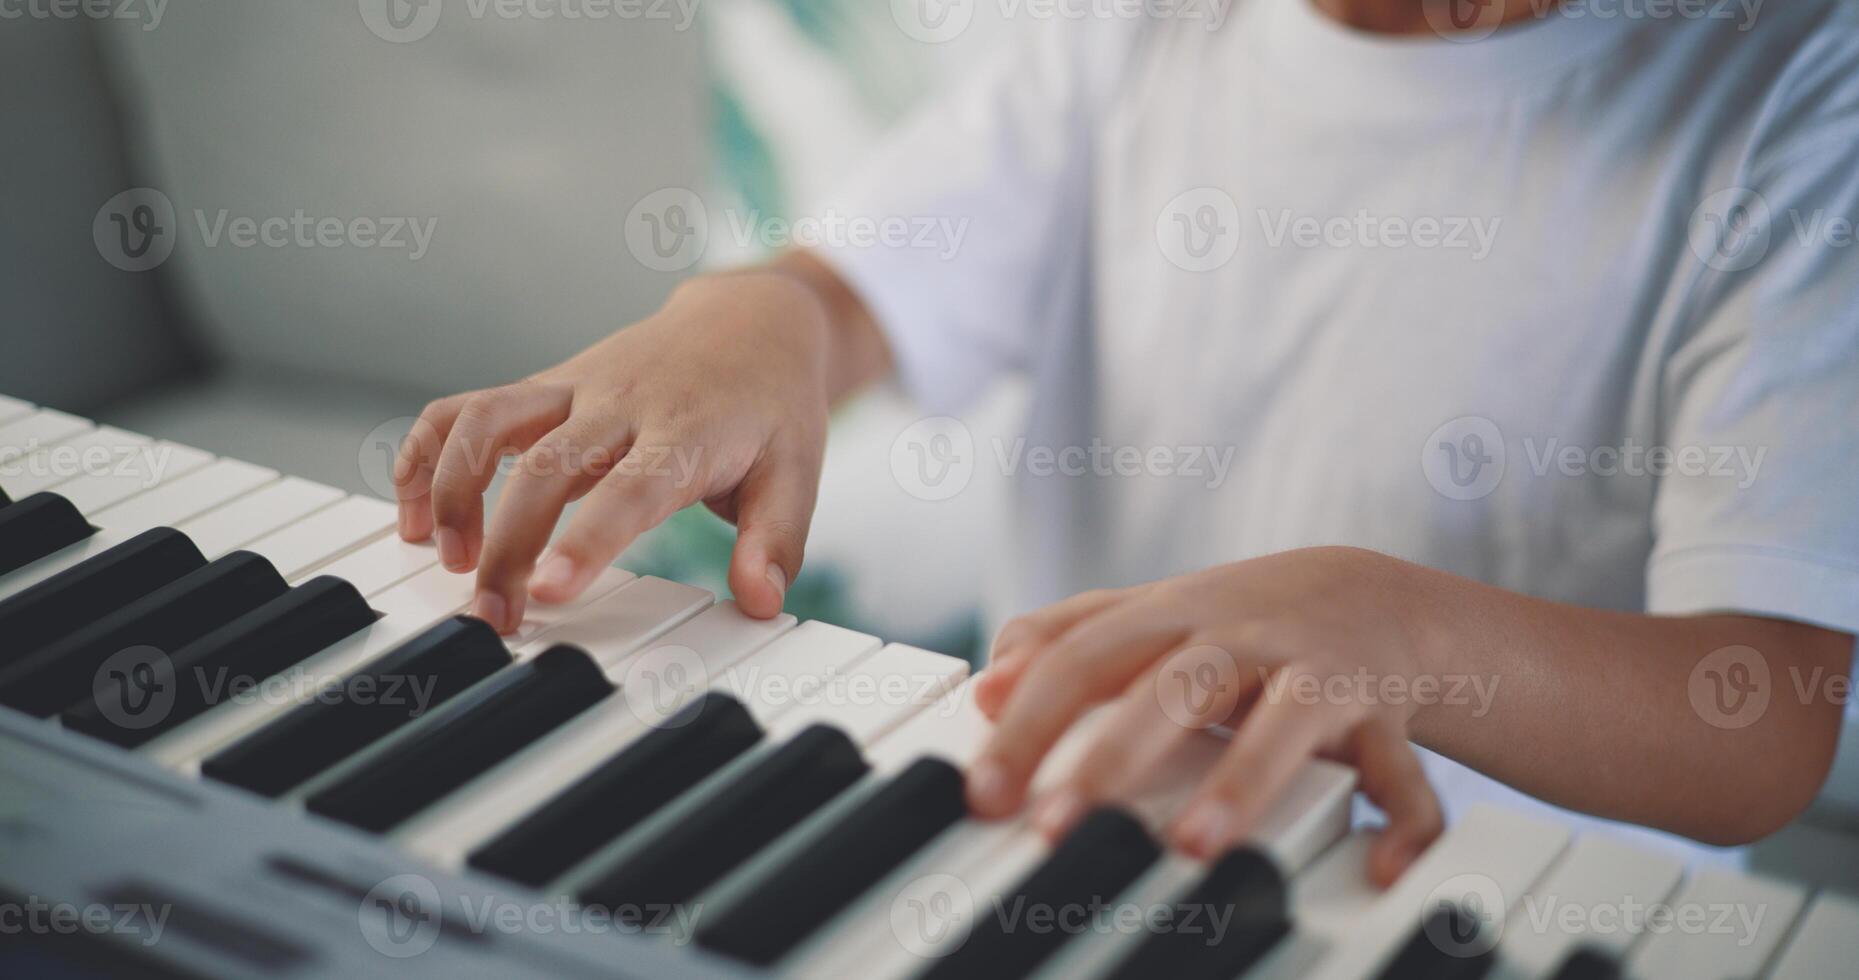 Cute boy enjoy to learning playing piano at home photo